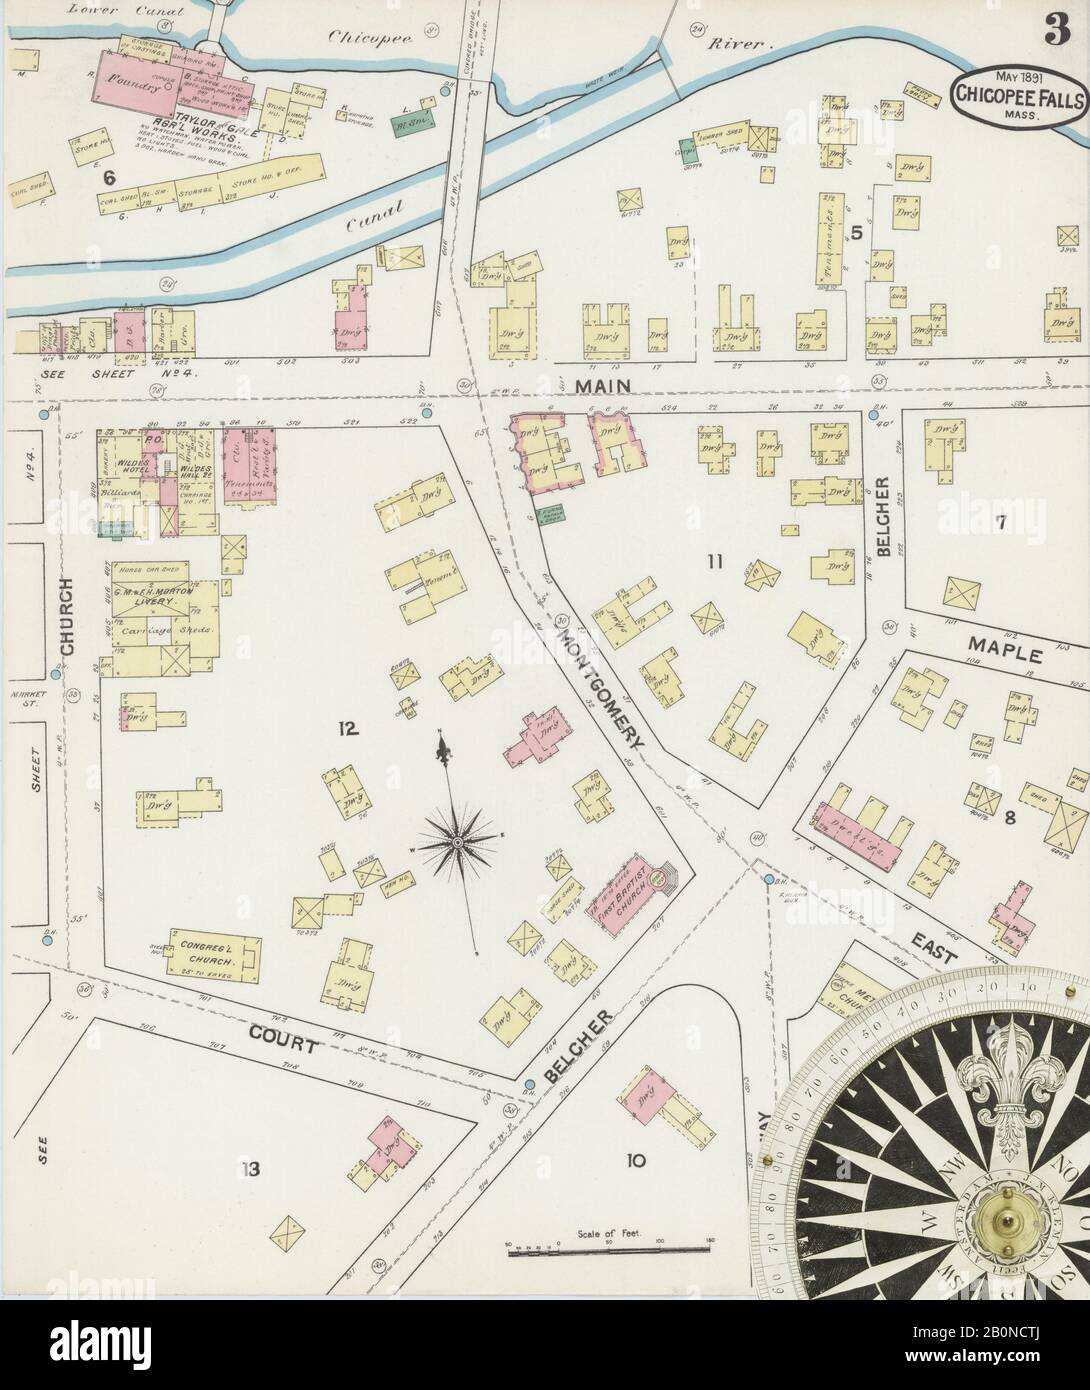 Image 3 of Sanborn Fire Insurance Map from Chicopee Falls, Hampden County, Massachusetts. May 1891. 5 Sheet(s), America, street map with a Nineteenth Century compass Stock Photo